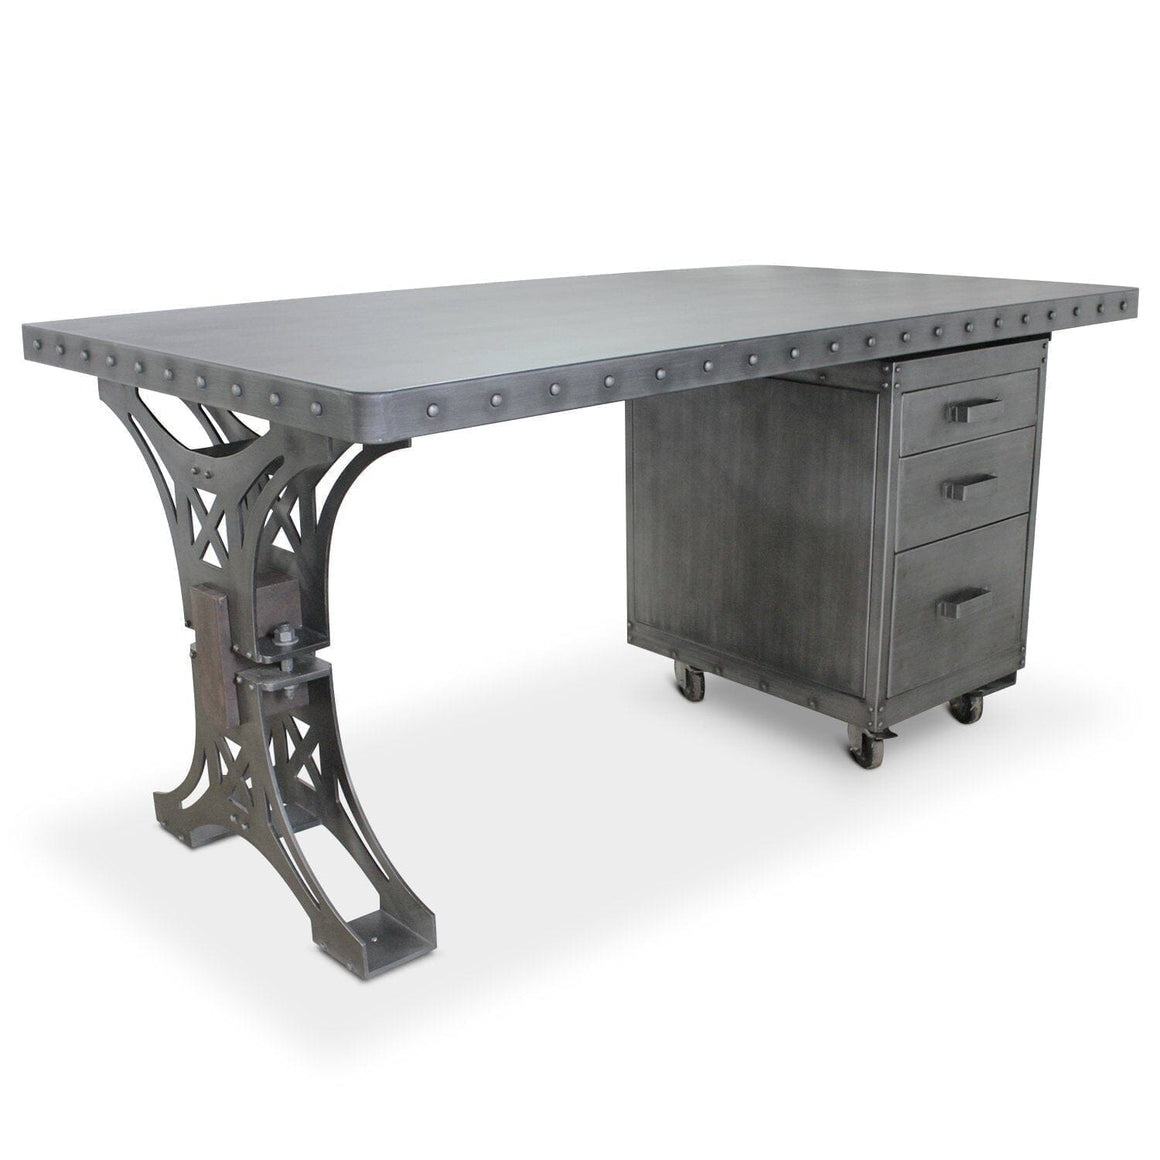 Pratt Truss Industrial Steel Office Desk with Movable Cabinet Drawers - Rustic Deco Incorporated